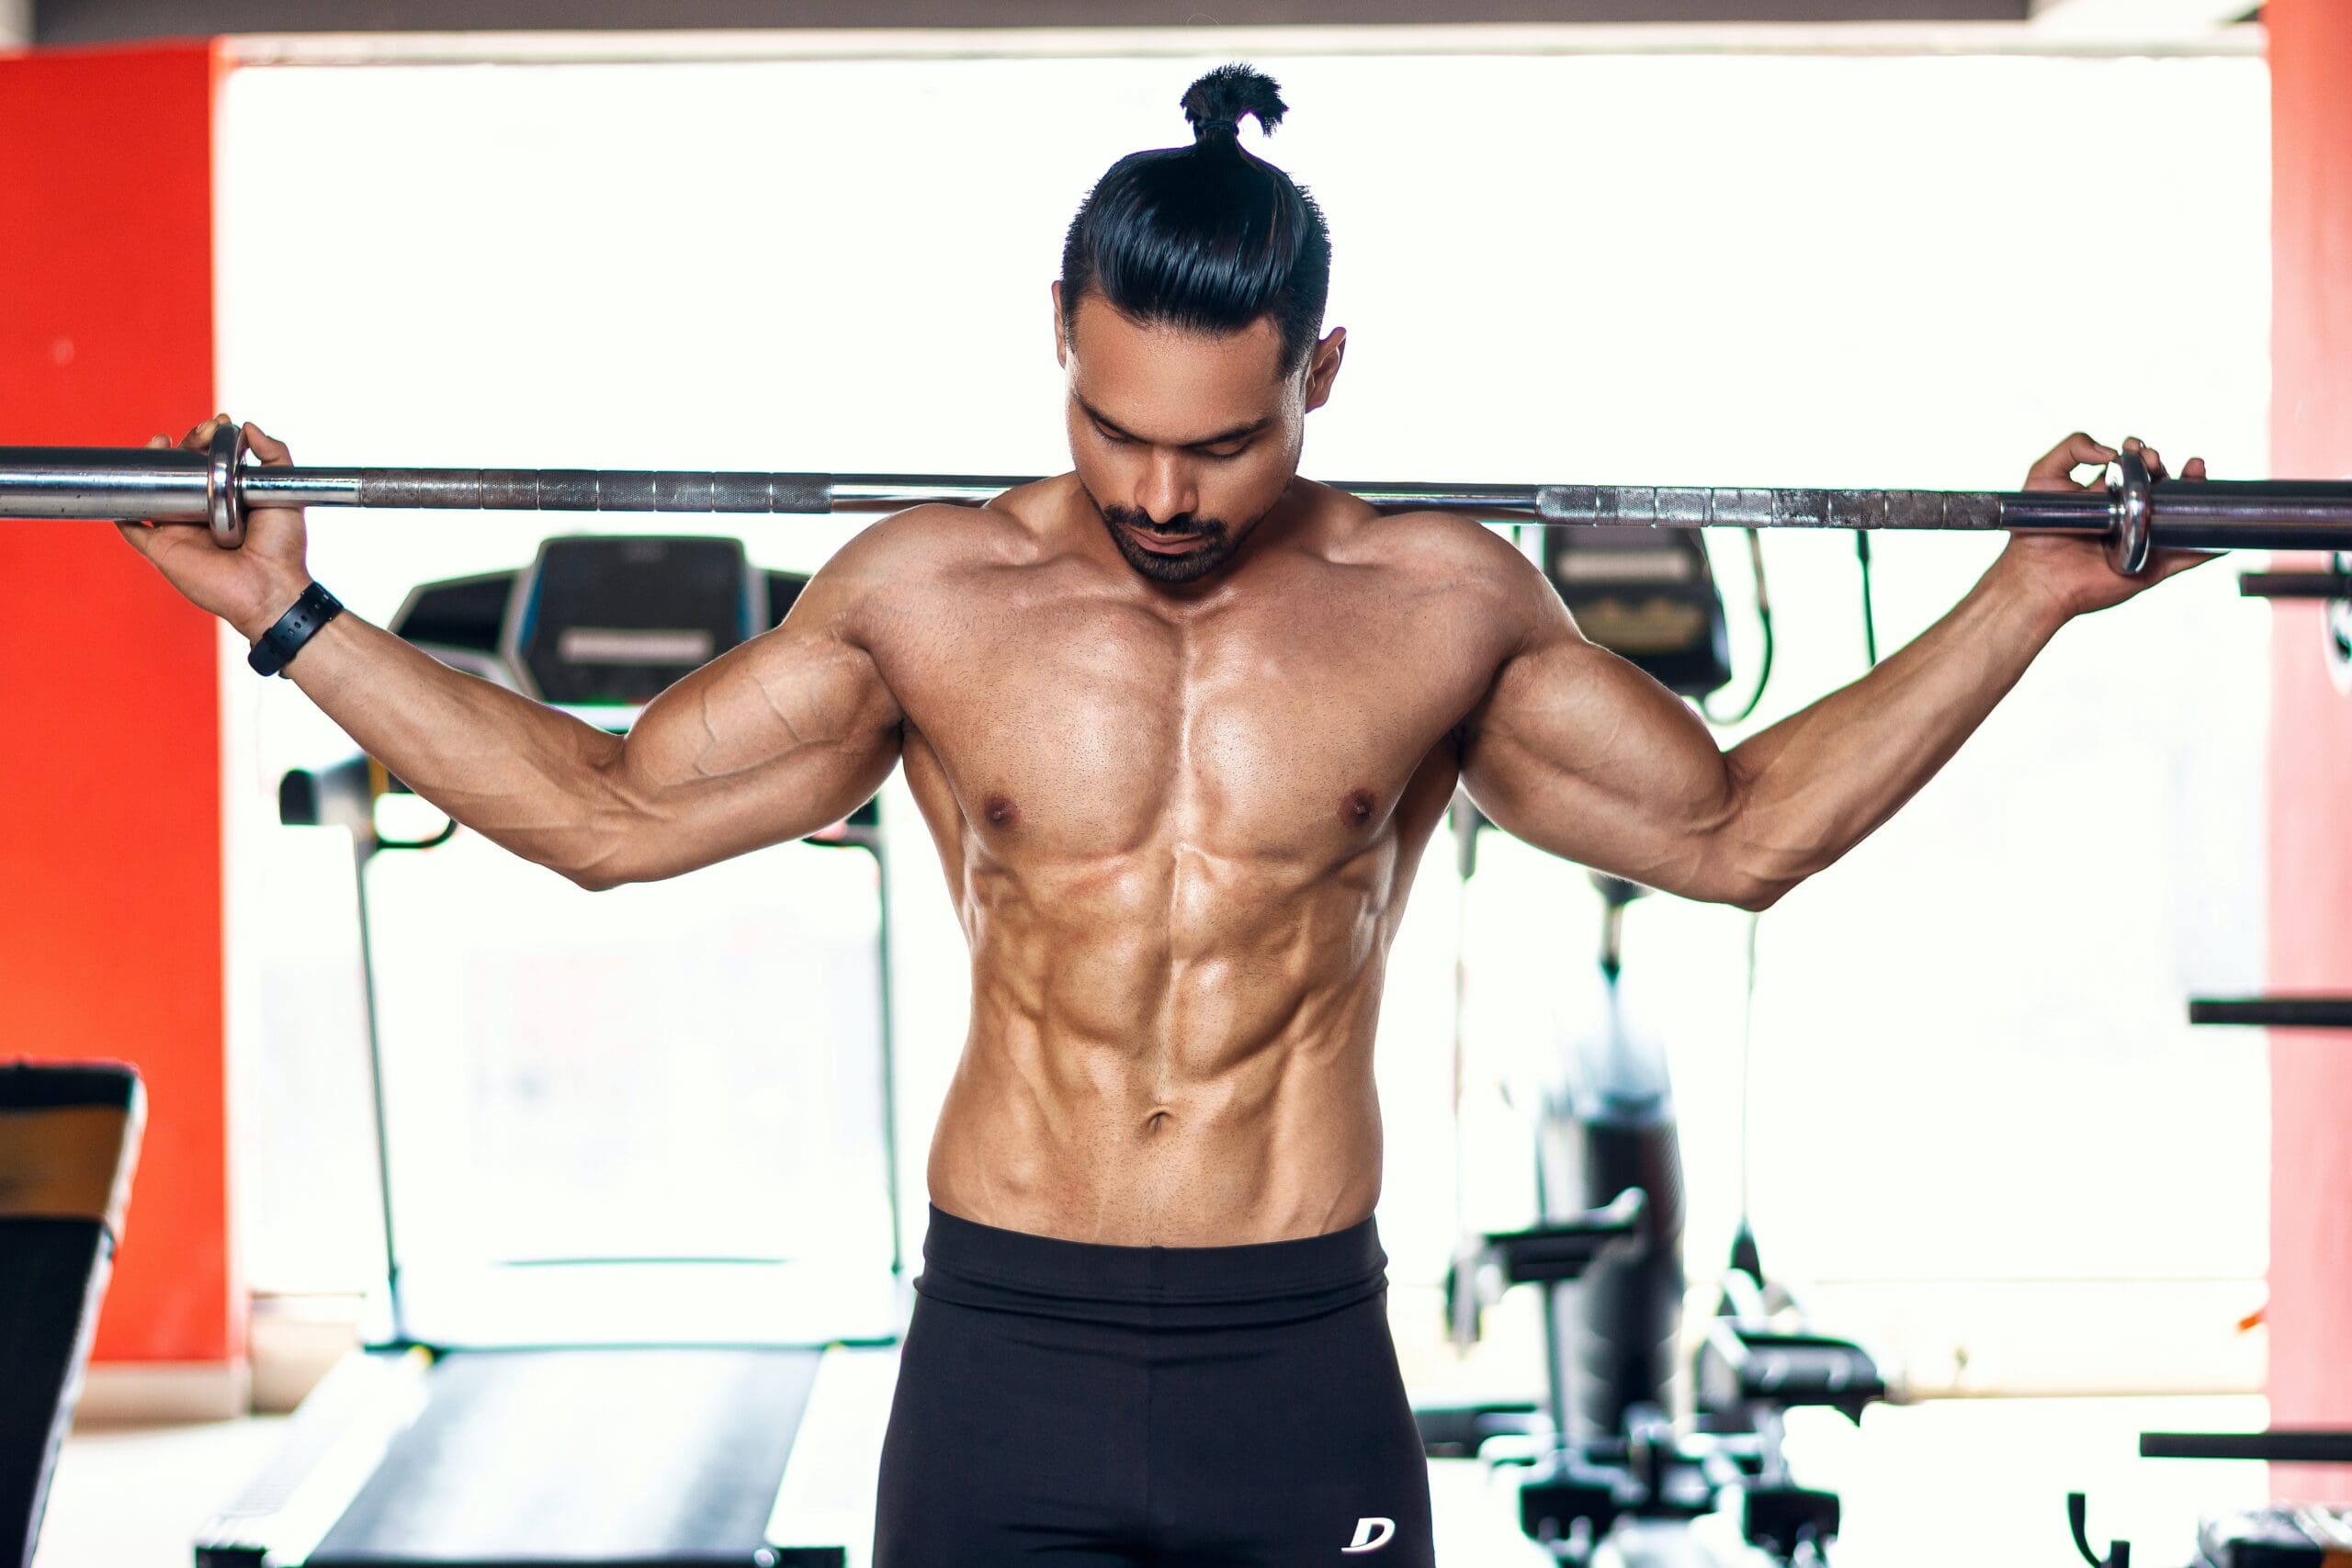 Get Ripped with These 5 Simple Training Rules